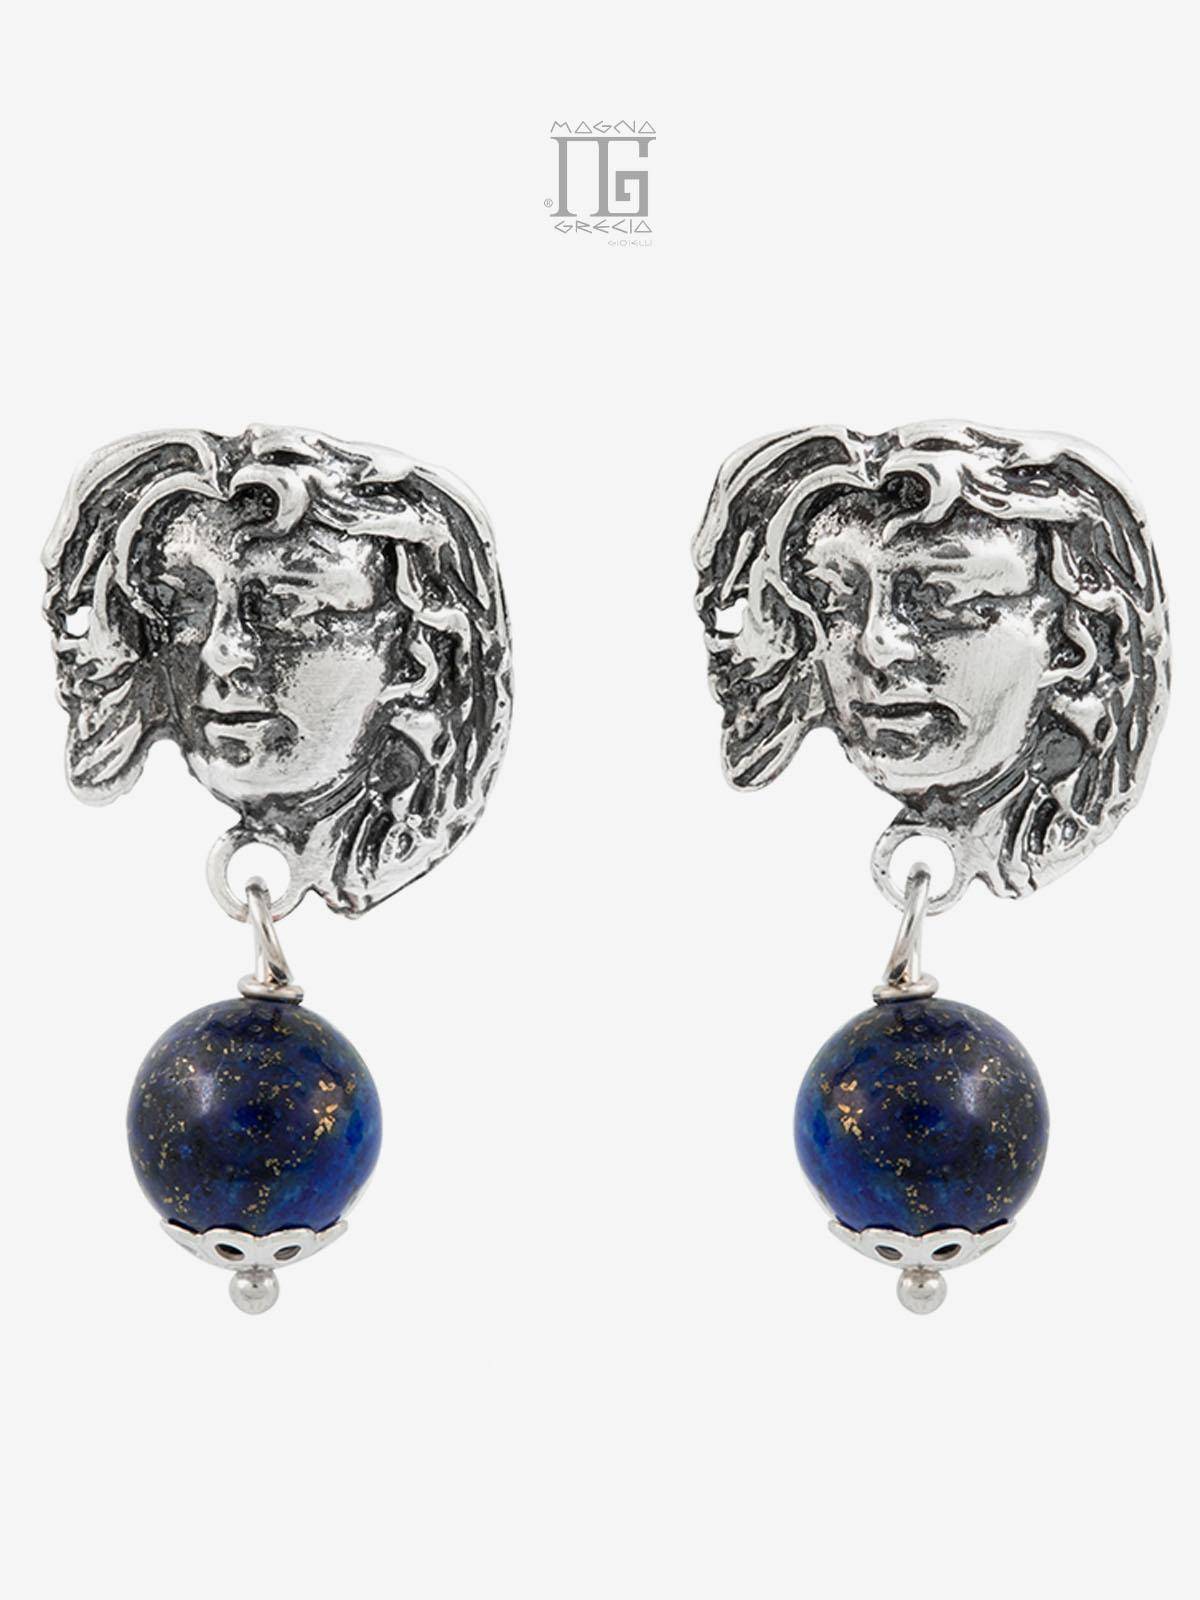 “Tranquility” earrings in Silver depicting the Face of the Goddess Venus and Blue Lapis Lazuli Cod. MGK 3852 V-4